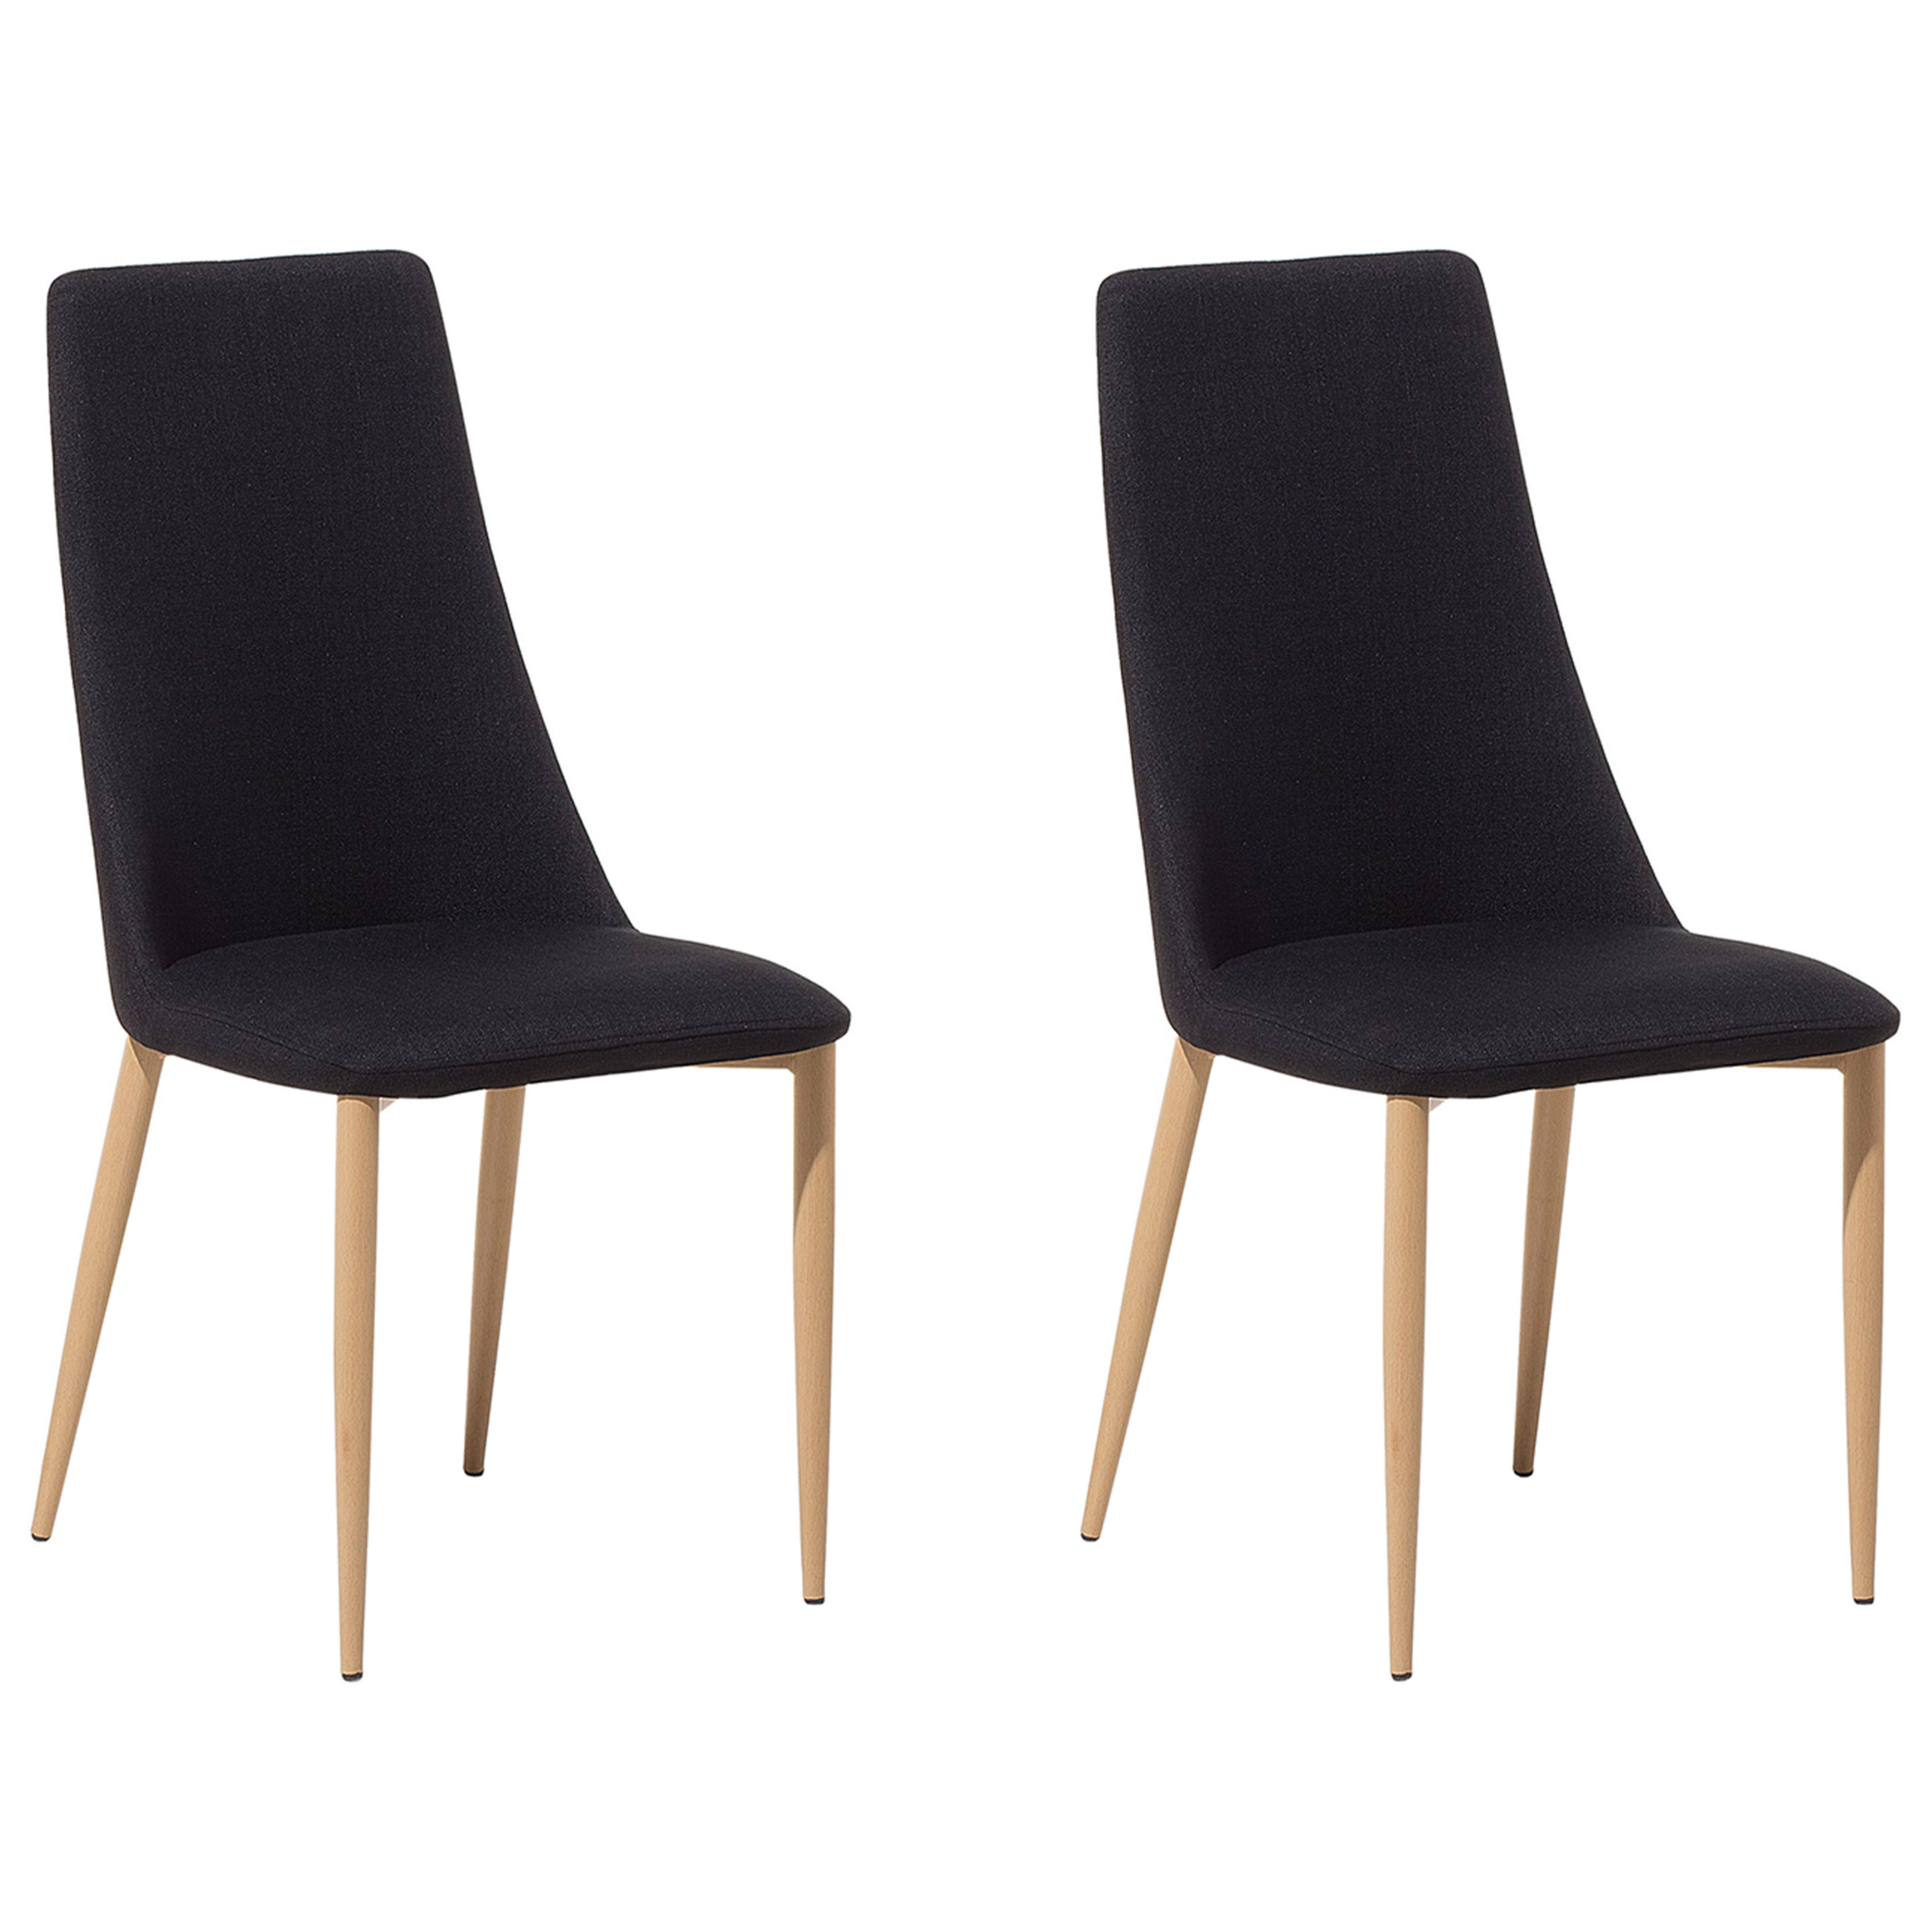 Beliani Set of 2 Dining Chairs Black Fabric Upholstered Seat High Back